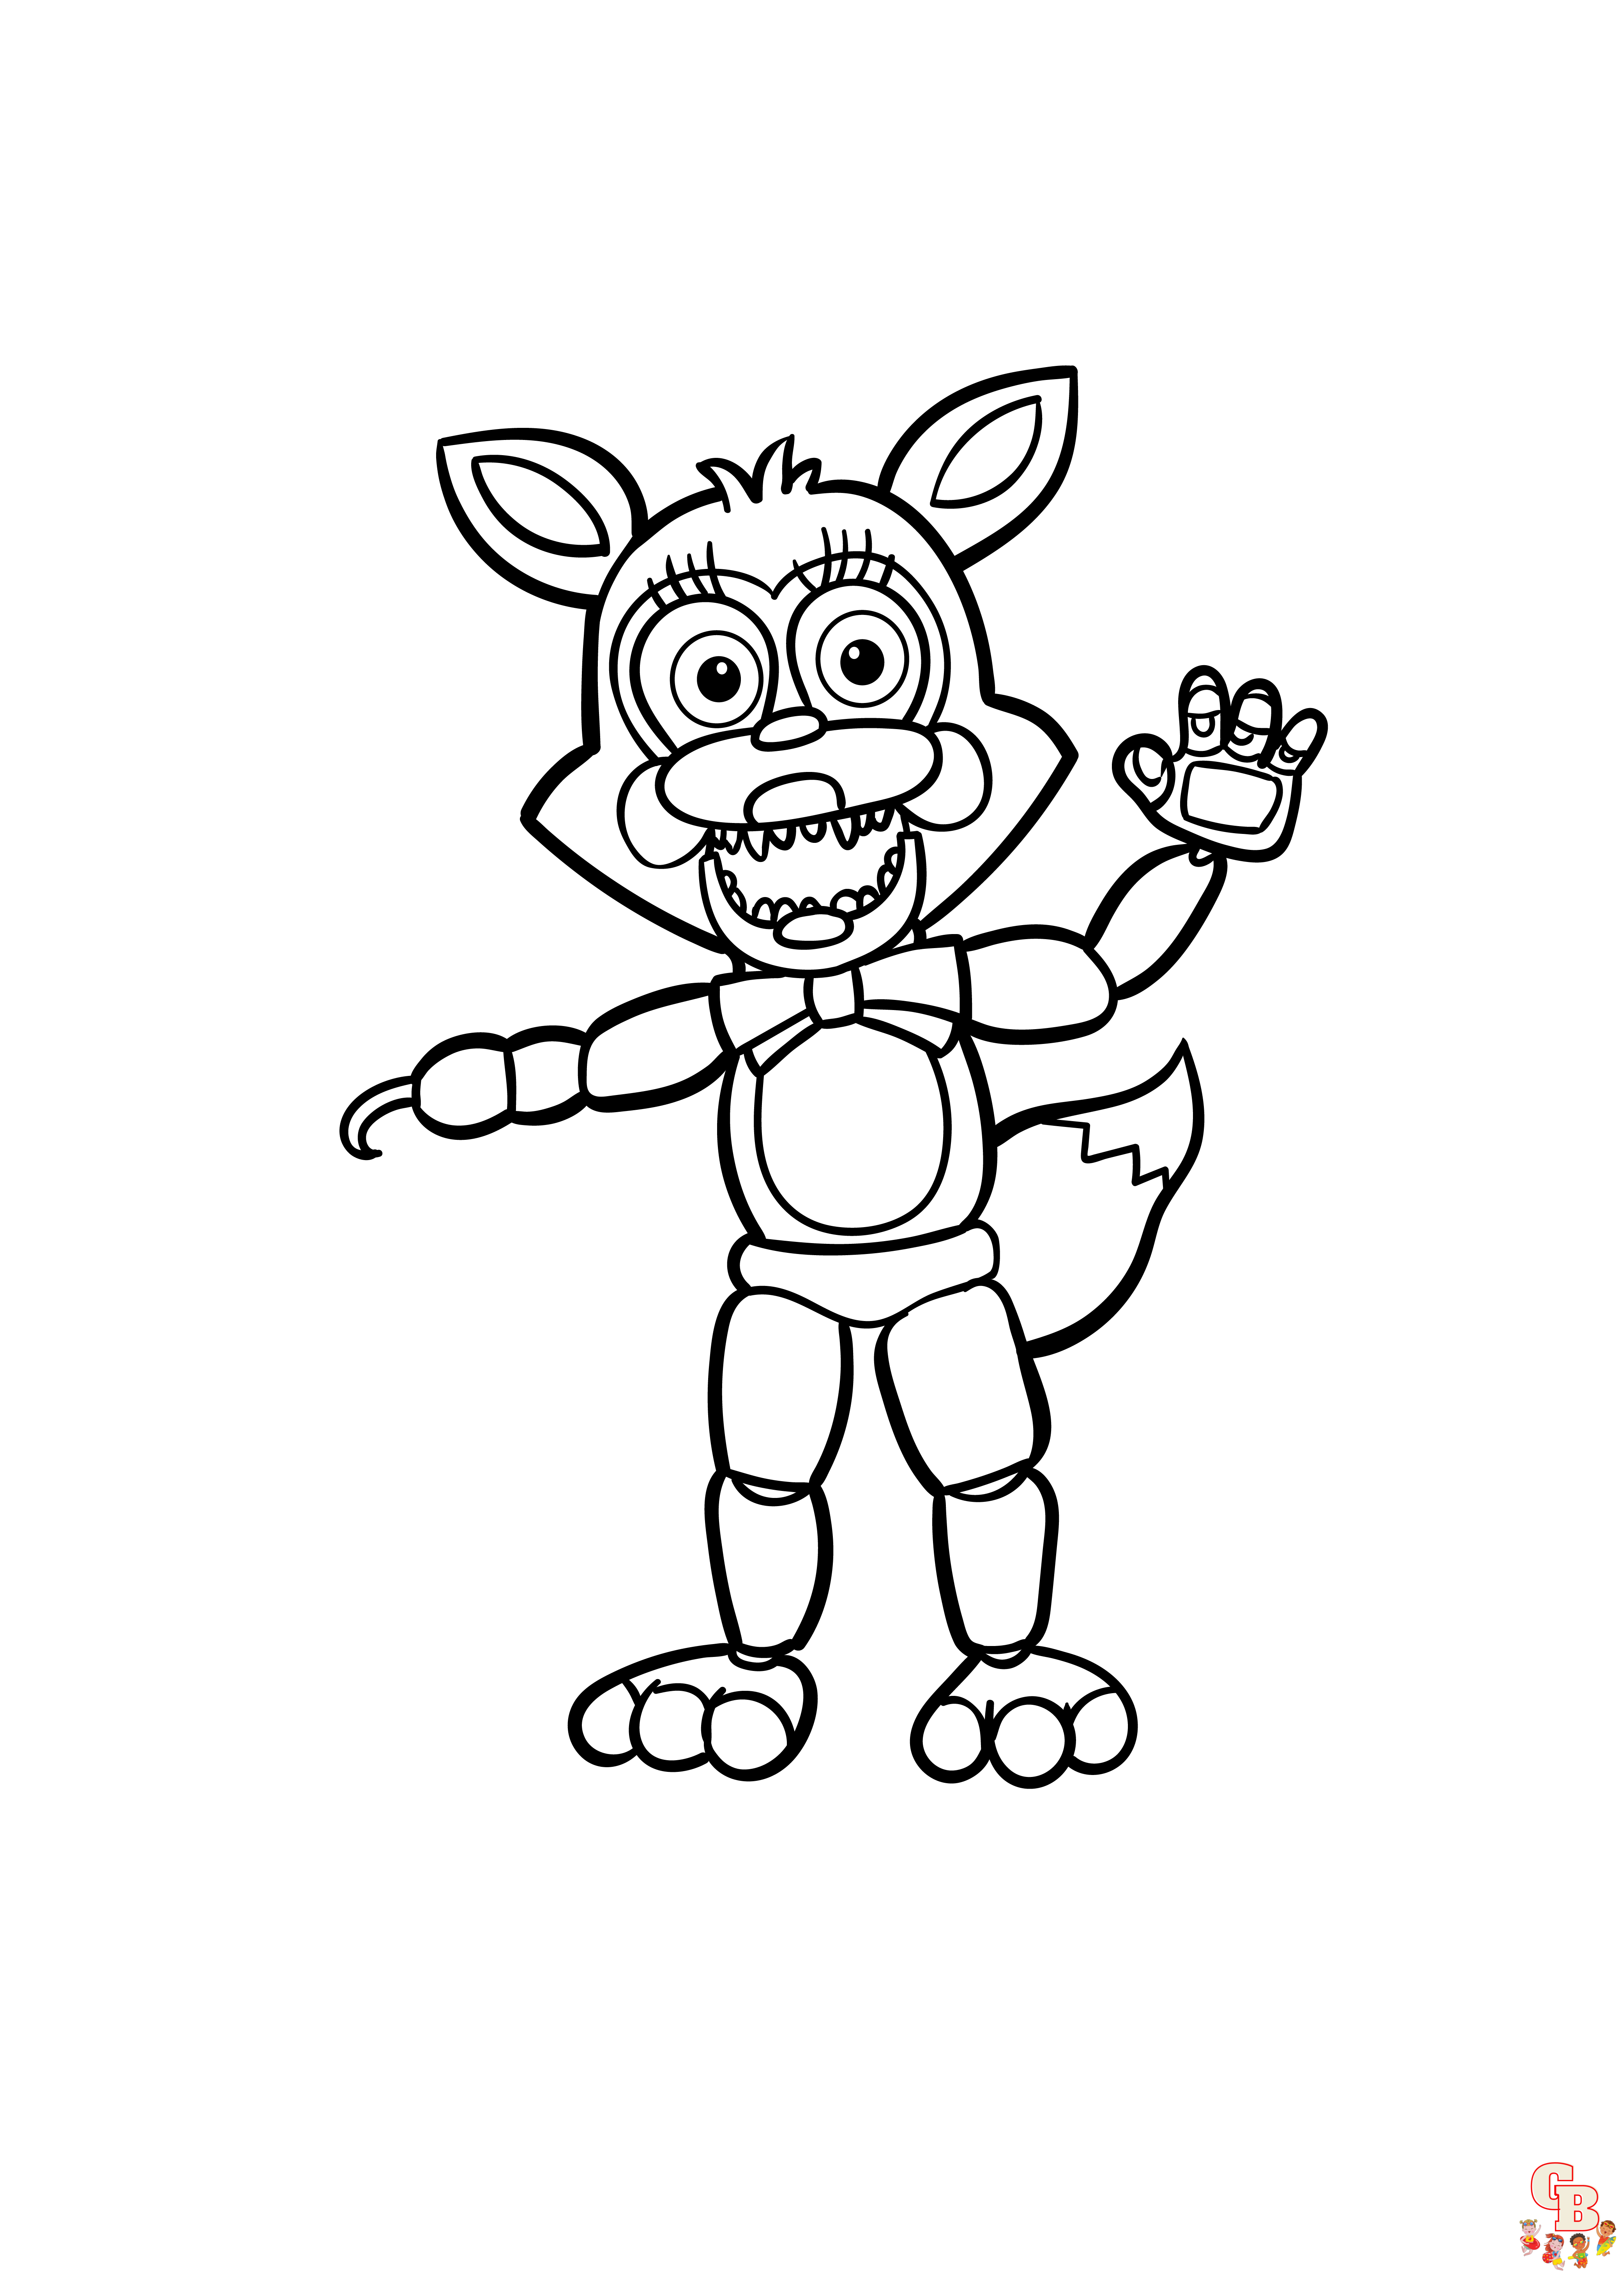 Five Nights at Freddy's coloring pages